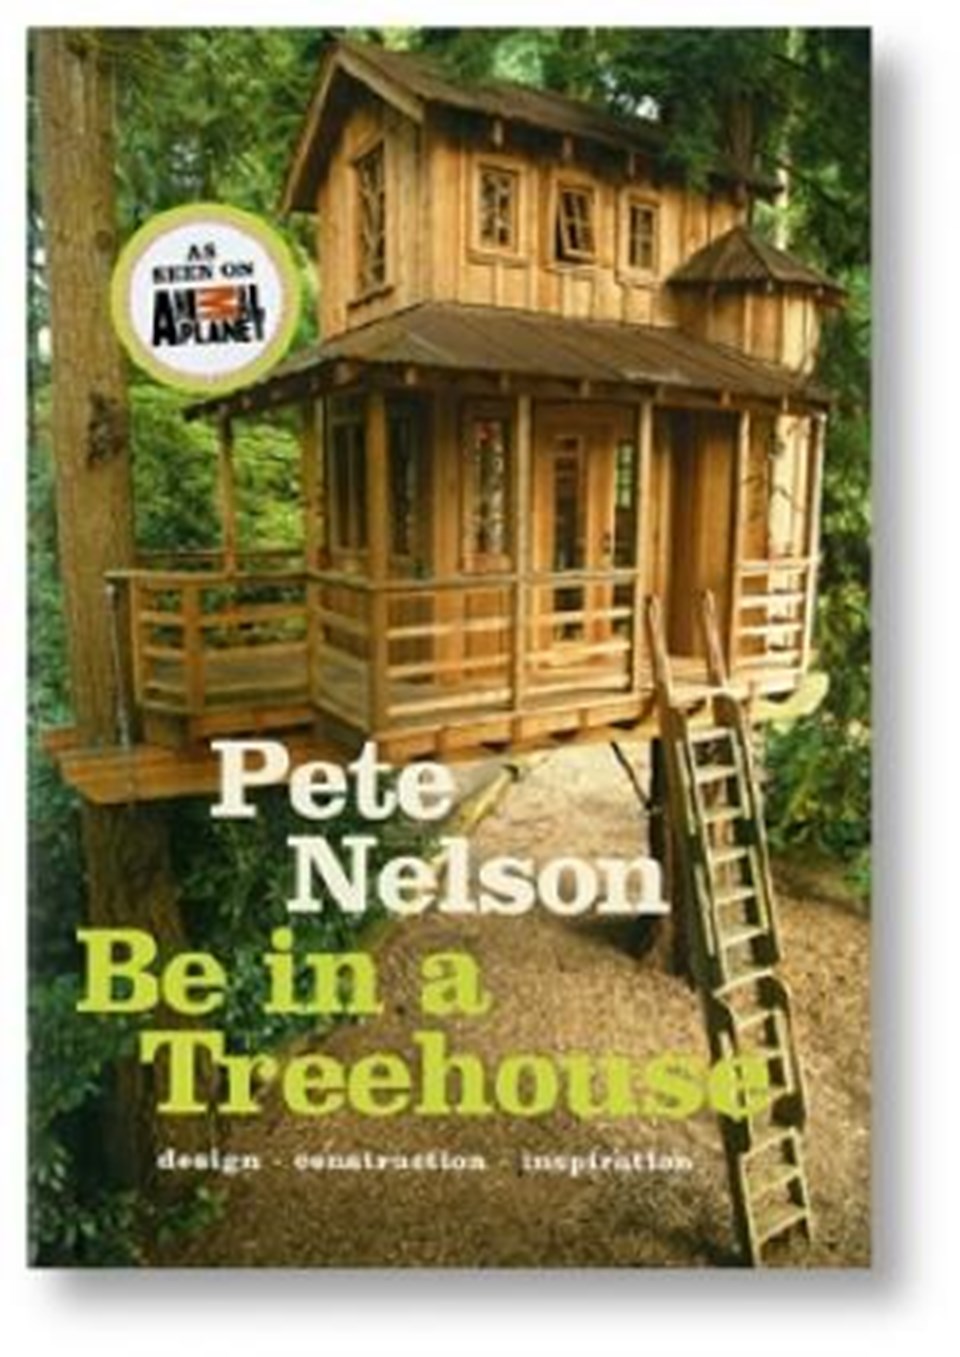 Be in a Treehouse